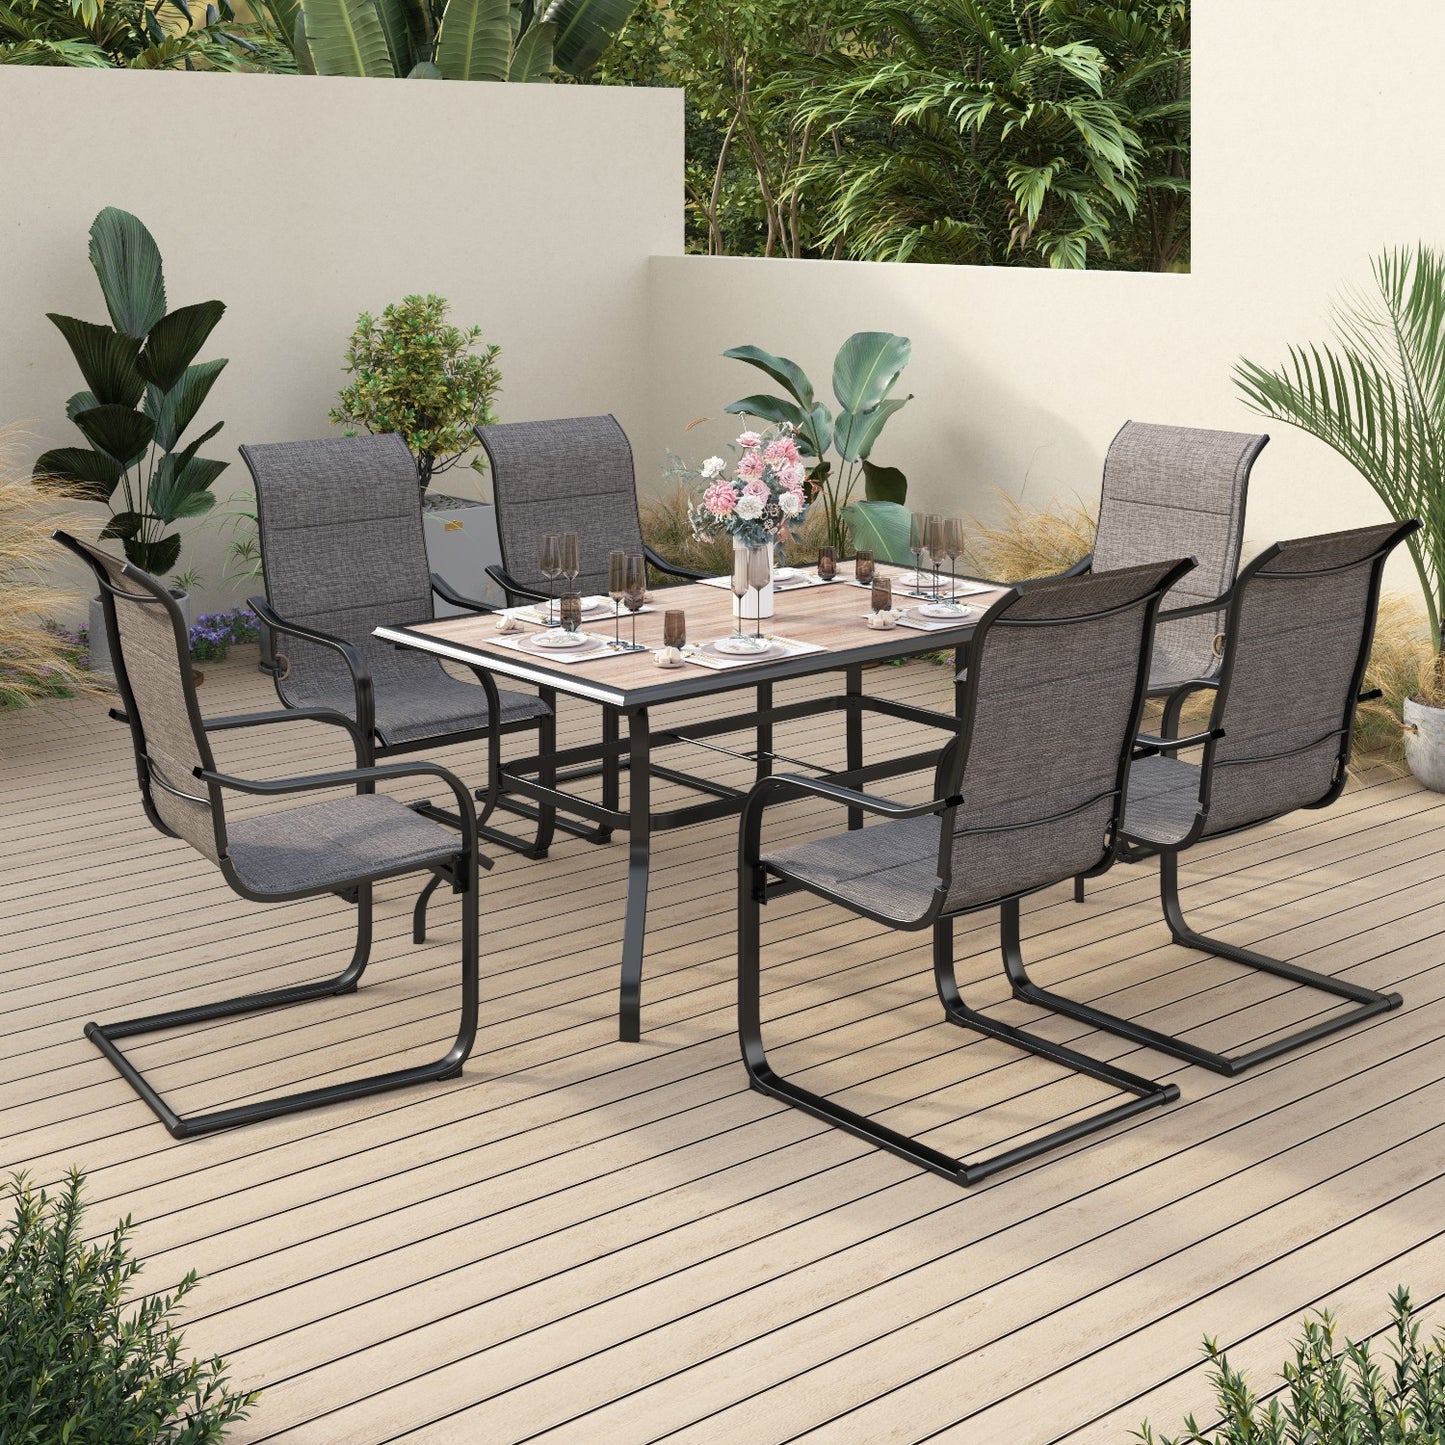 Sophia & William 7 Pieces Metal Patio Dining Set Paded Chairs and Table Furniture Set